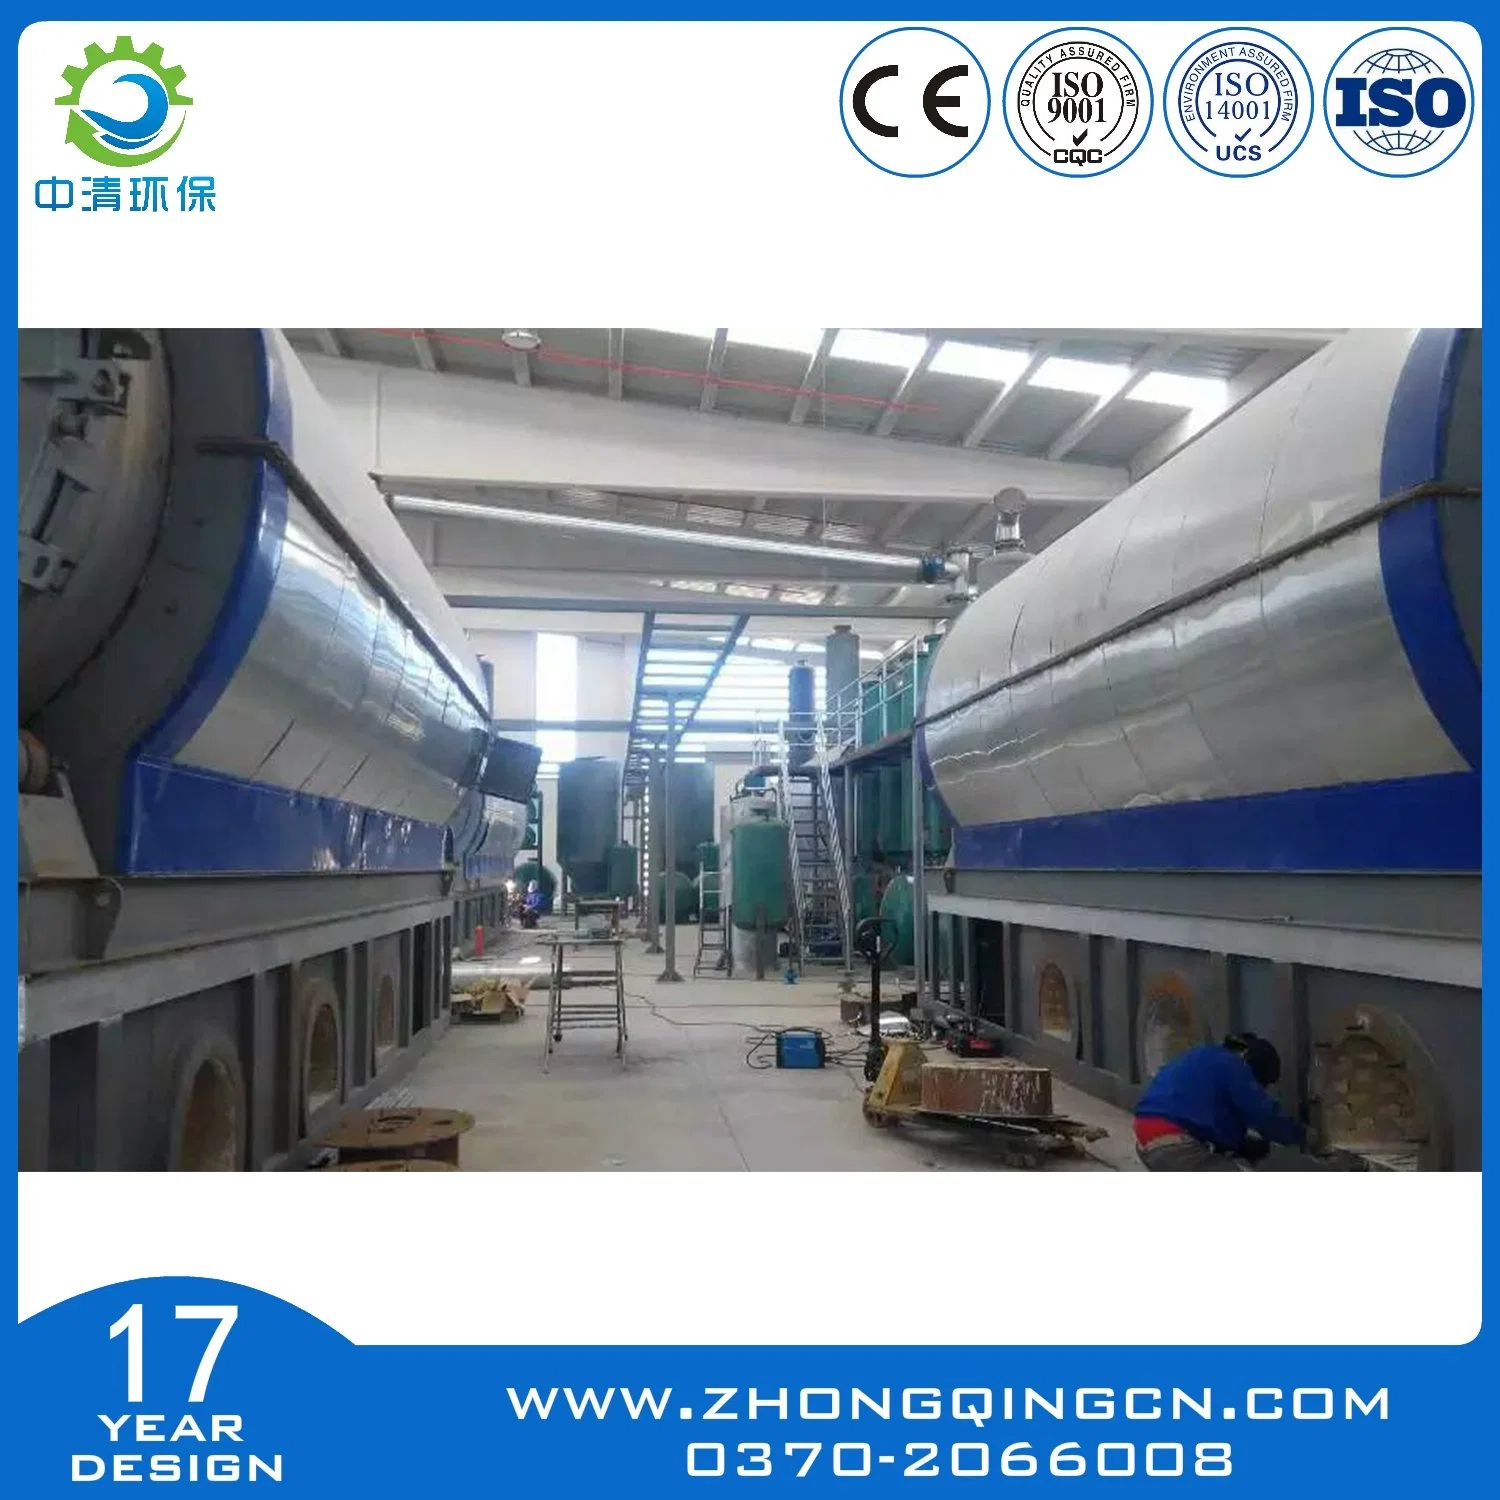 Used Tire/Used Plastics/Used Rrubber/Solid Watse Pyrolysis Plant/Recycling Machine to Diesel Oil with CE, SGS, ISO, BV